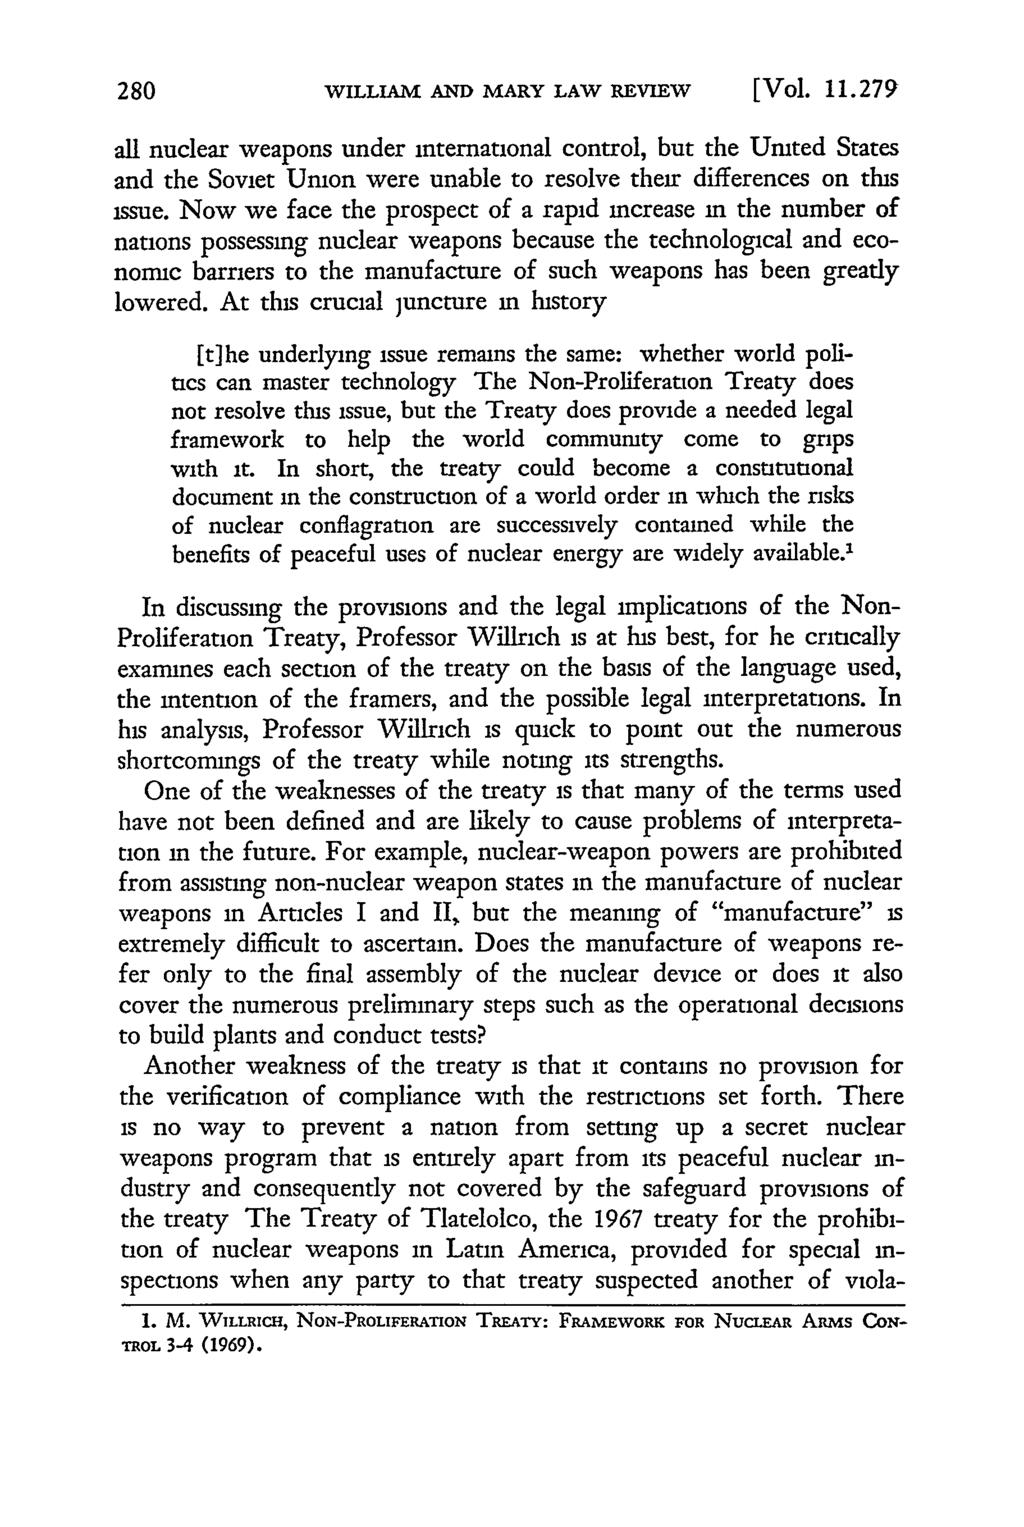 WILLIA AND MARY LAW REVIEW [Vol. 11.279 all nuclear weapons under international control, but the United States and the Soviet Union were unable to resolve their differences on this issue.